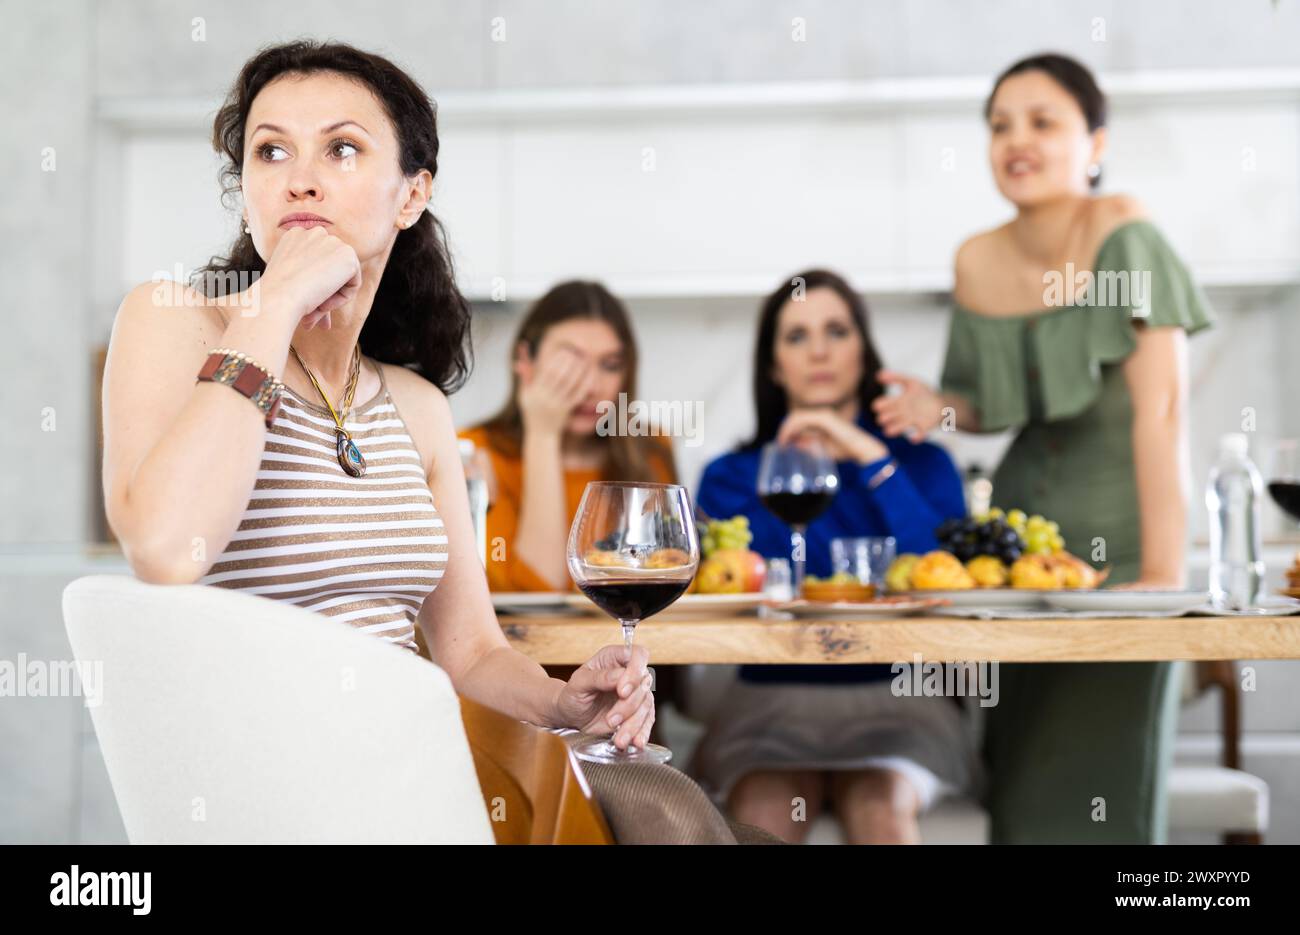 Miffed woman during disagreement with friends at house party Stock Photo